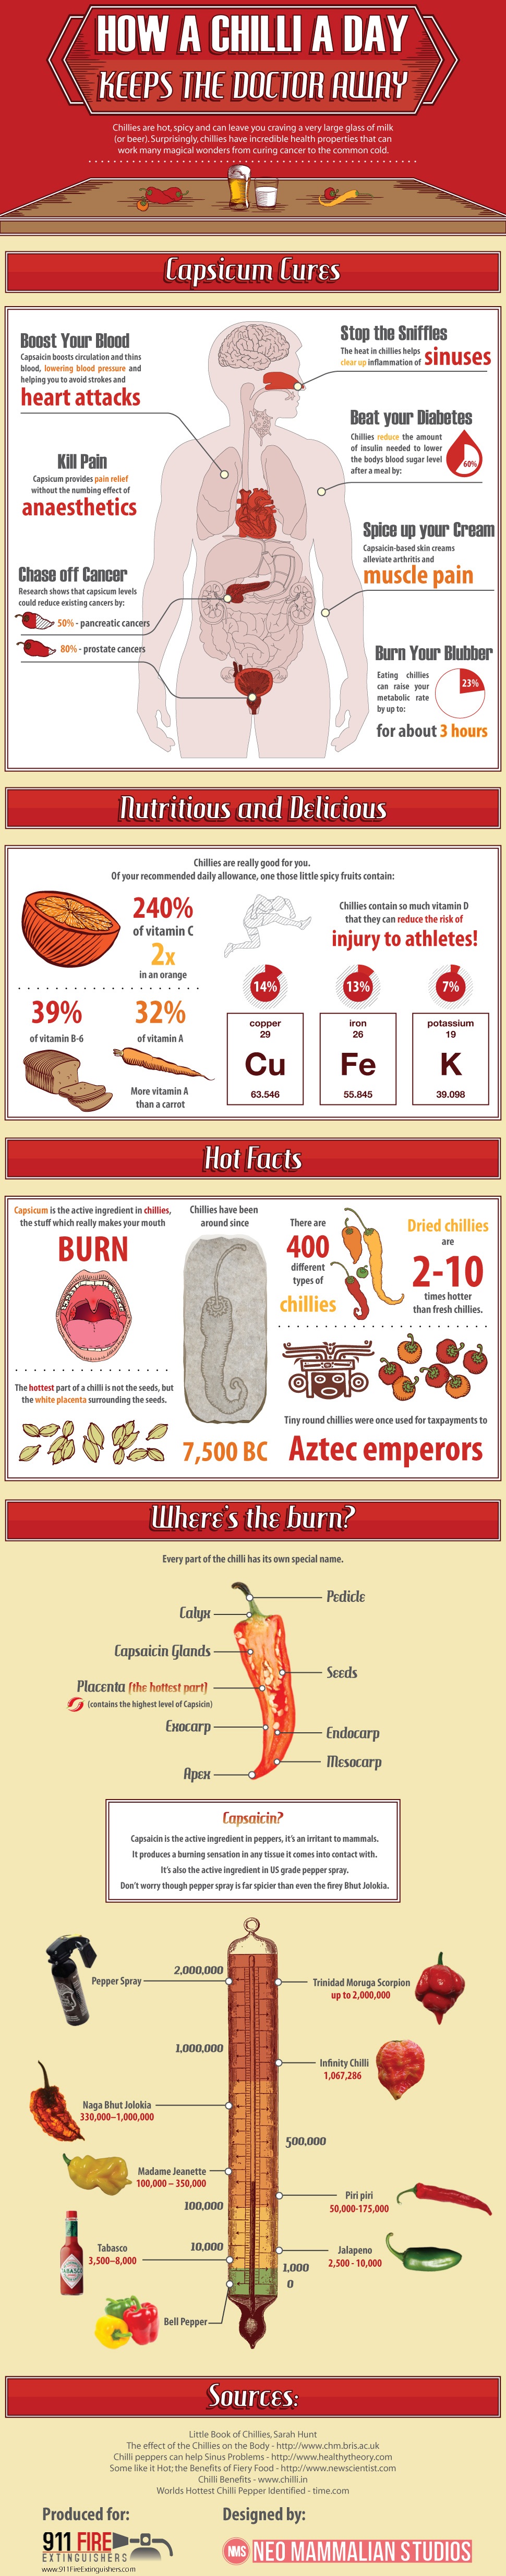 A Chili A Day Keeps The Doctor Away? Infographic